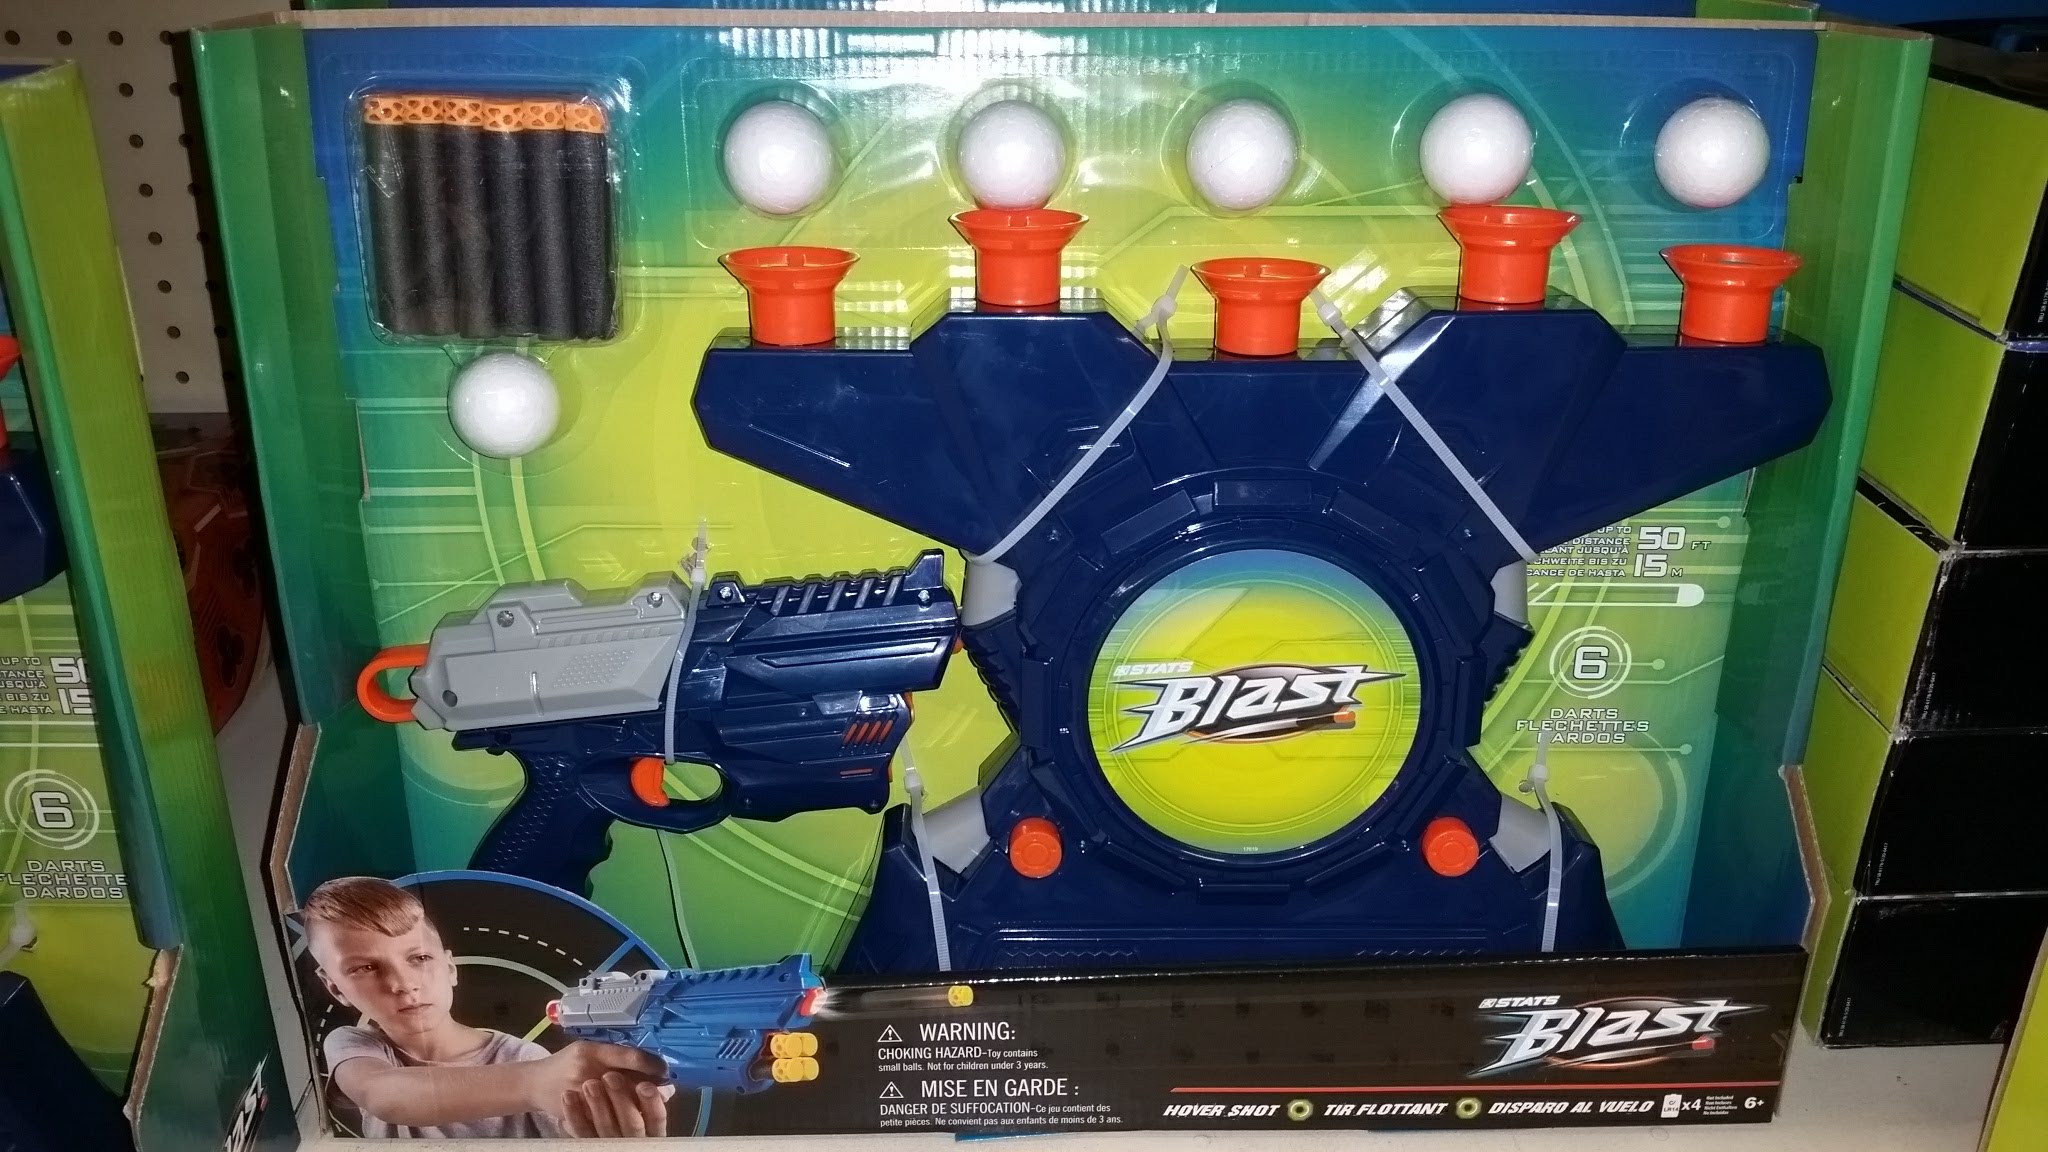 Wholesale Blaster Storm Hover Blast Floating Target Game with 5